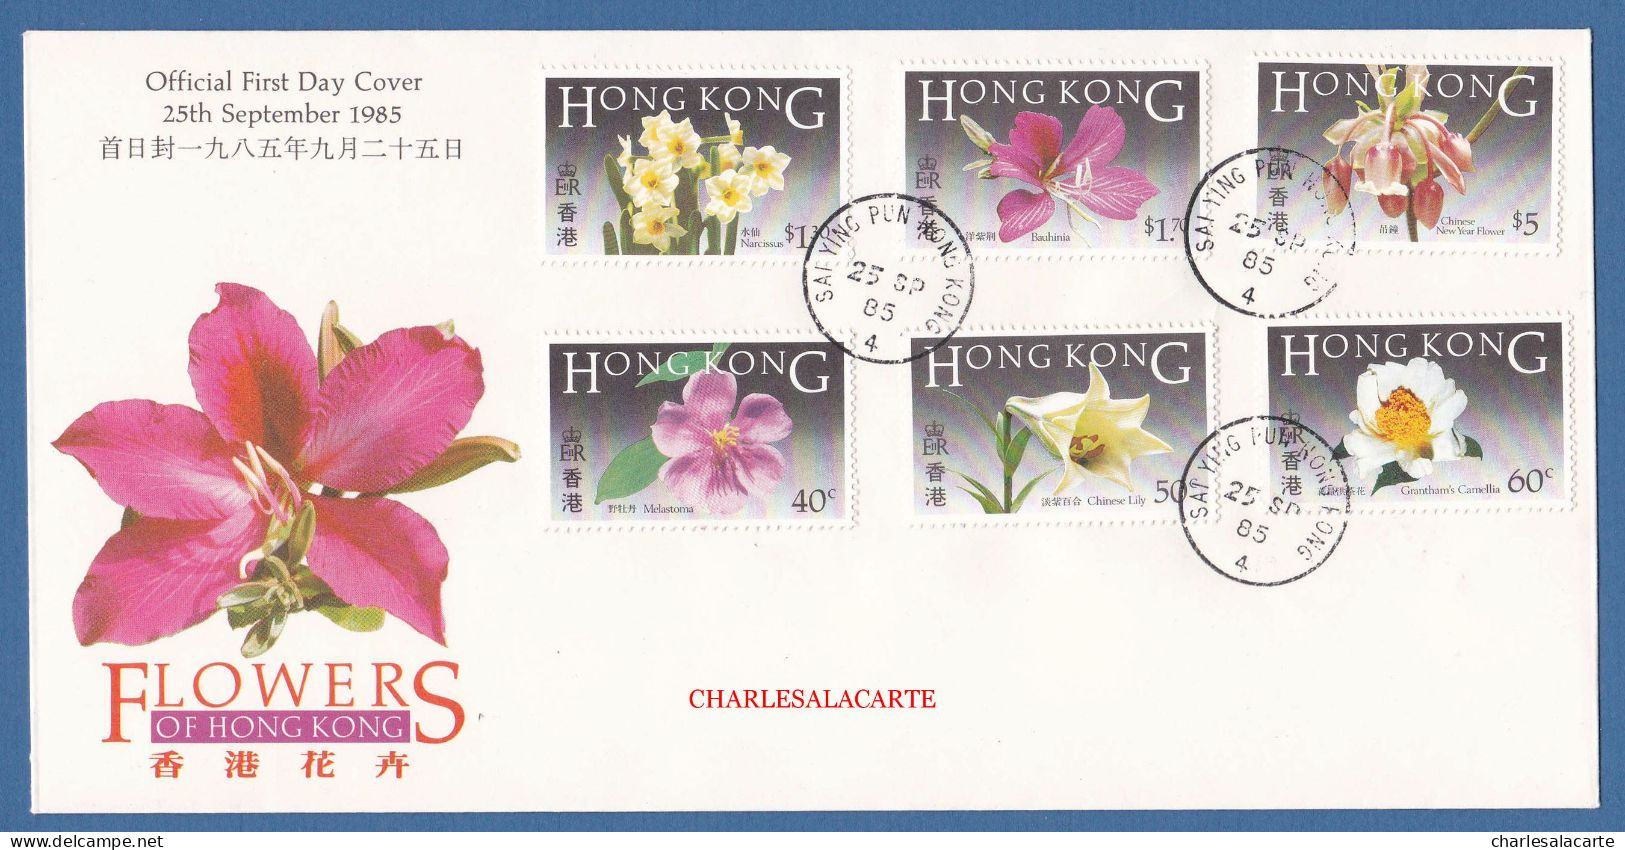 HONG KONG 1985  NATIVE FLOWERS  S.G. 497-502  F.D.C. - Covers & Documents